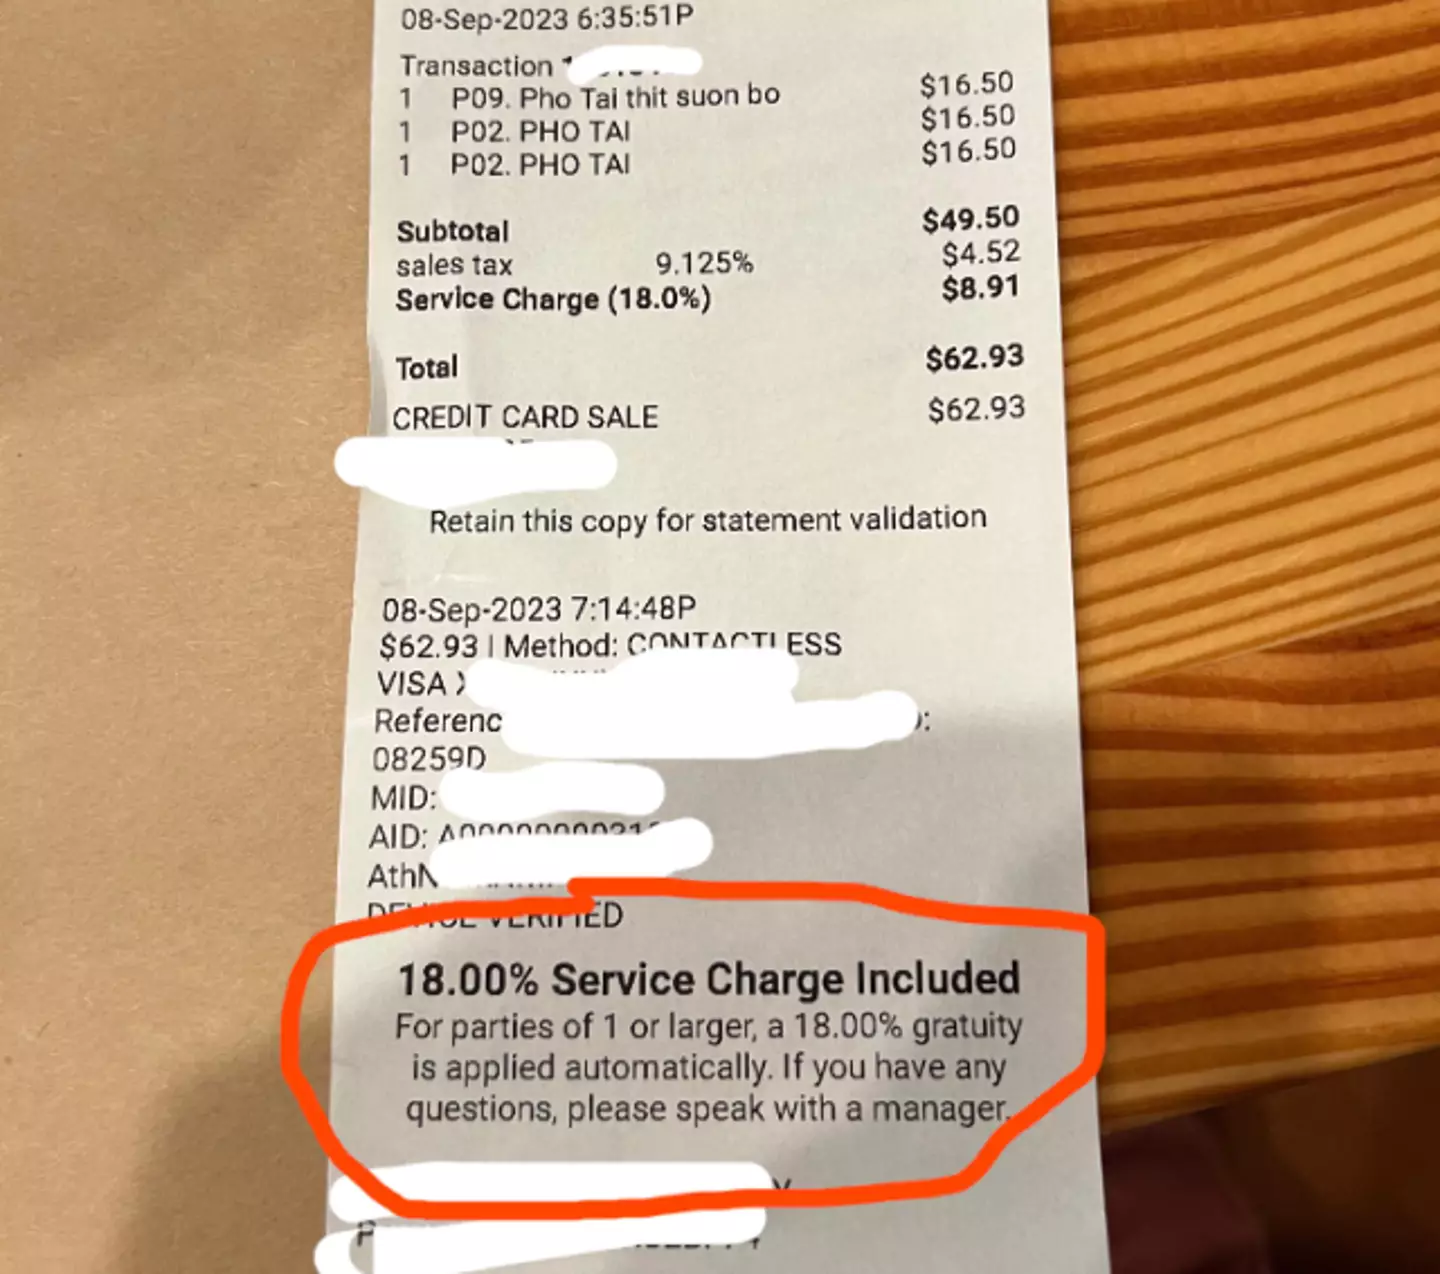 The bill has a 18 percent service charge for all customers.